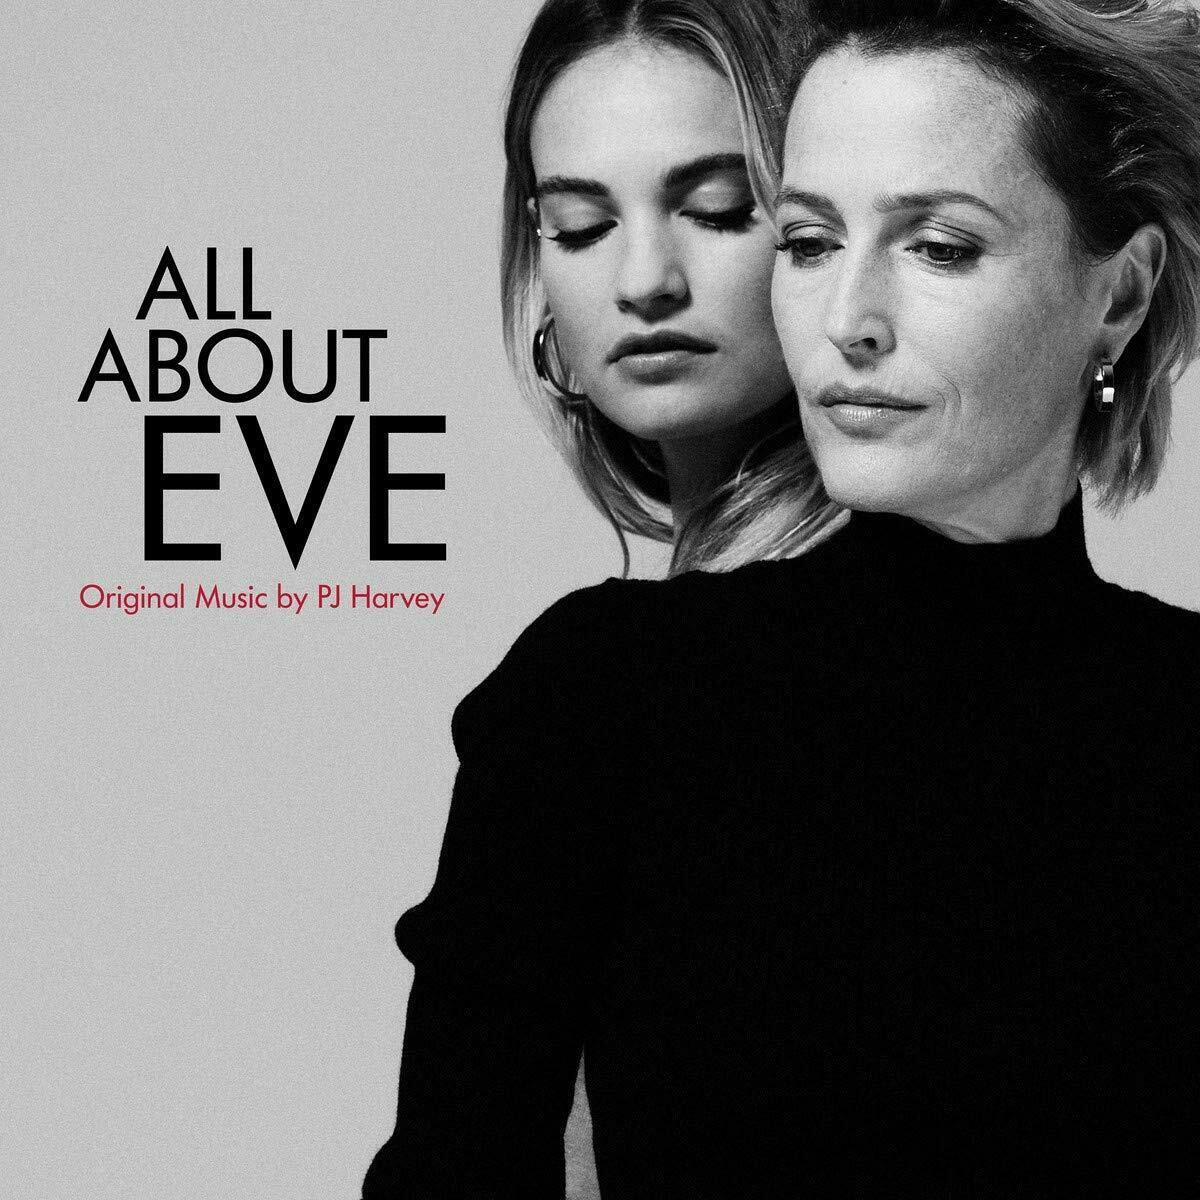 All About Eve - Original Music by PJ Harvey